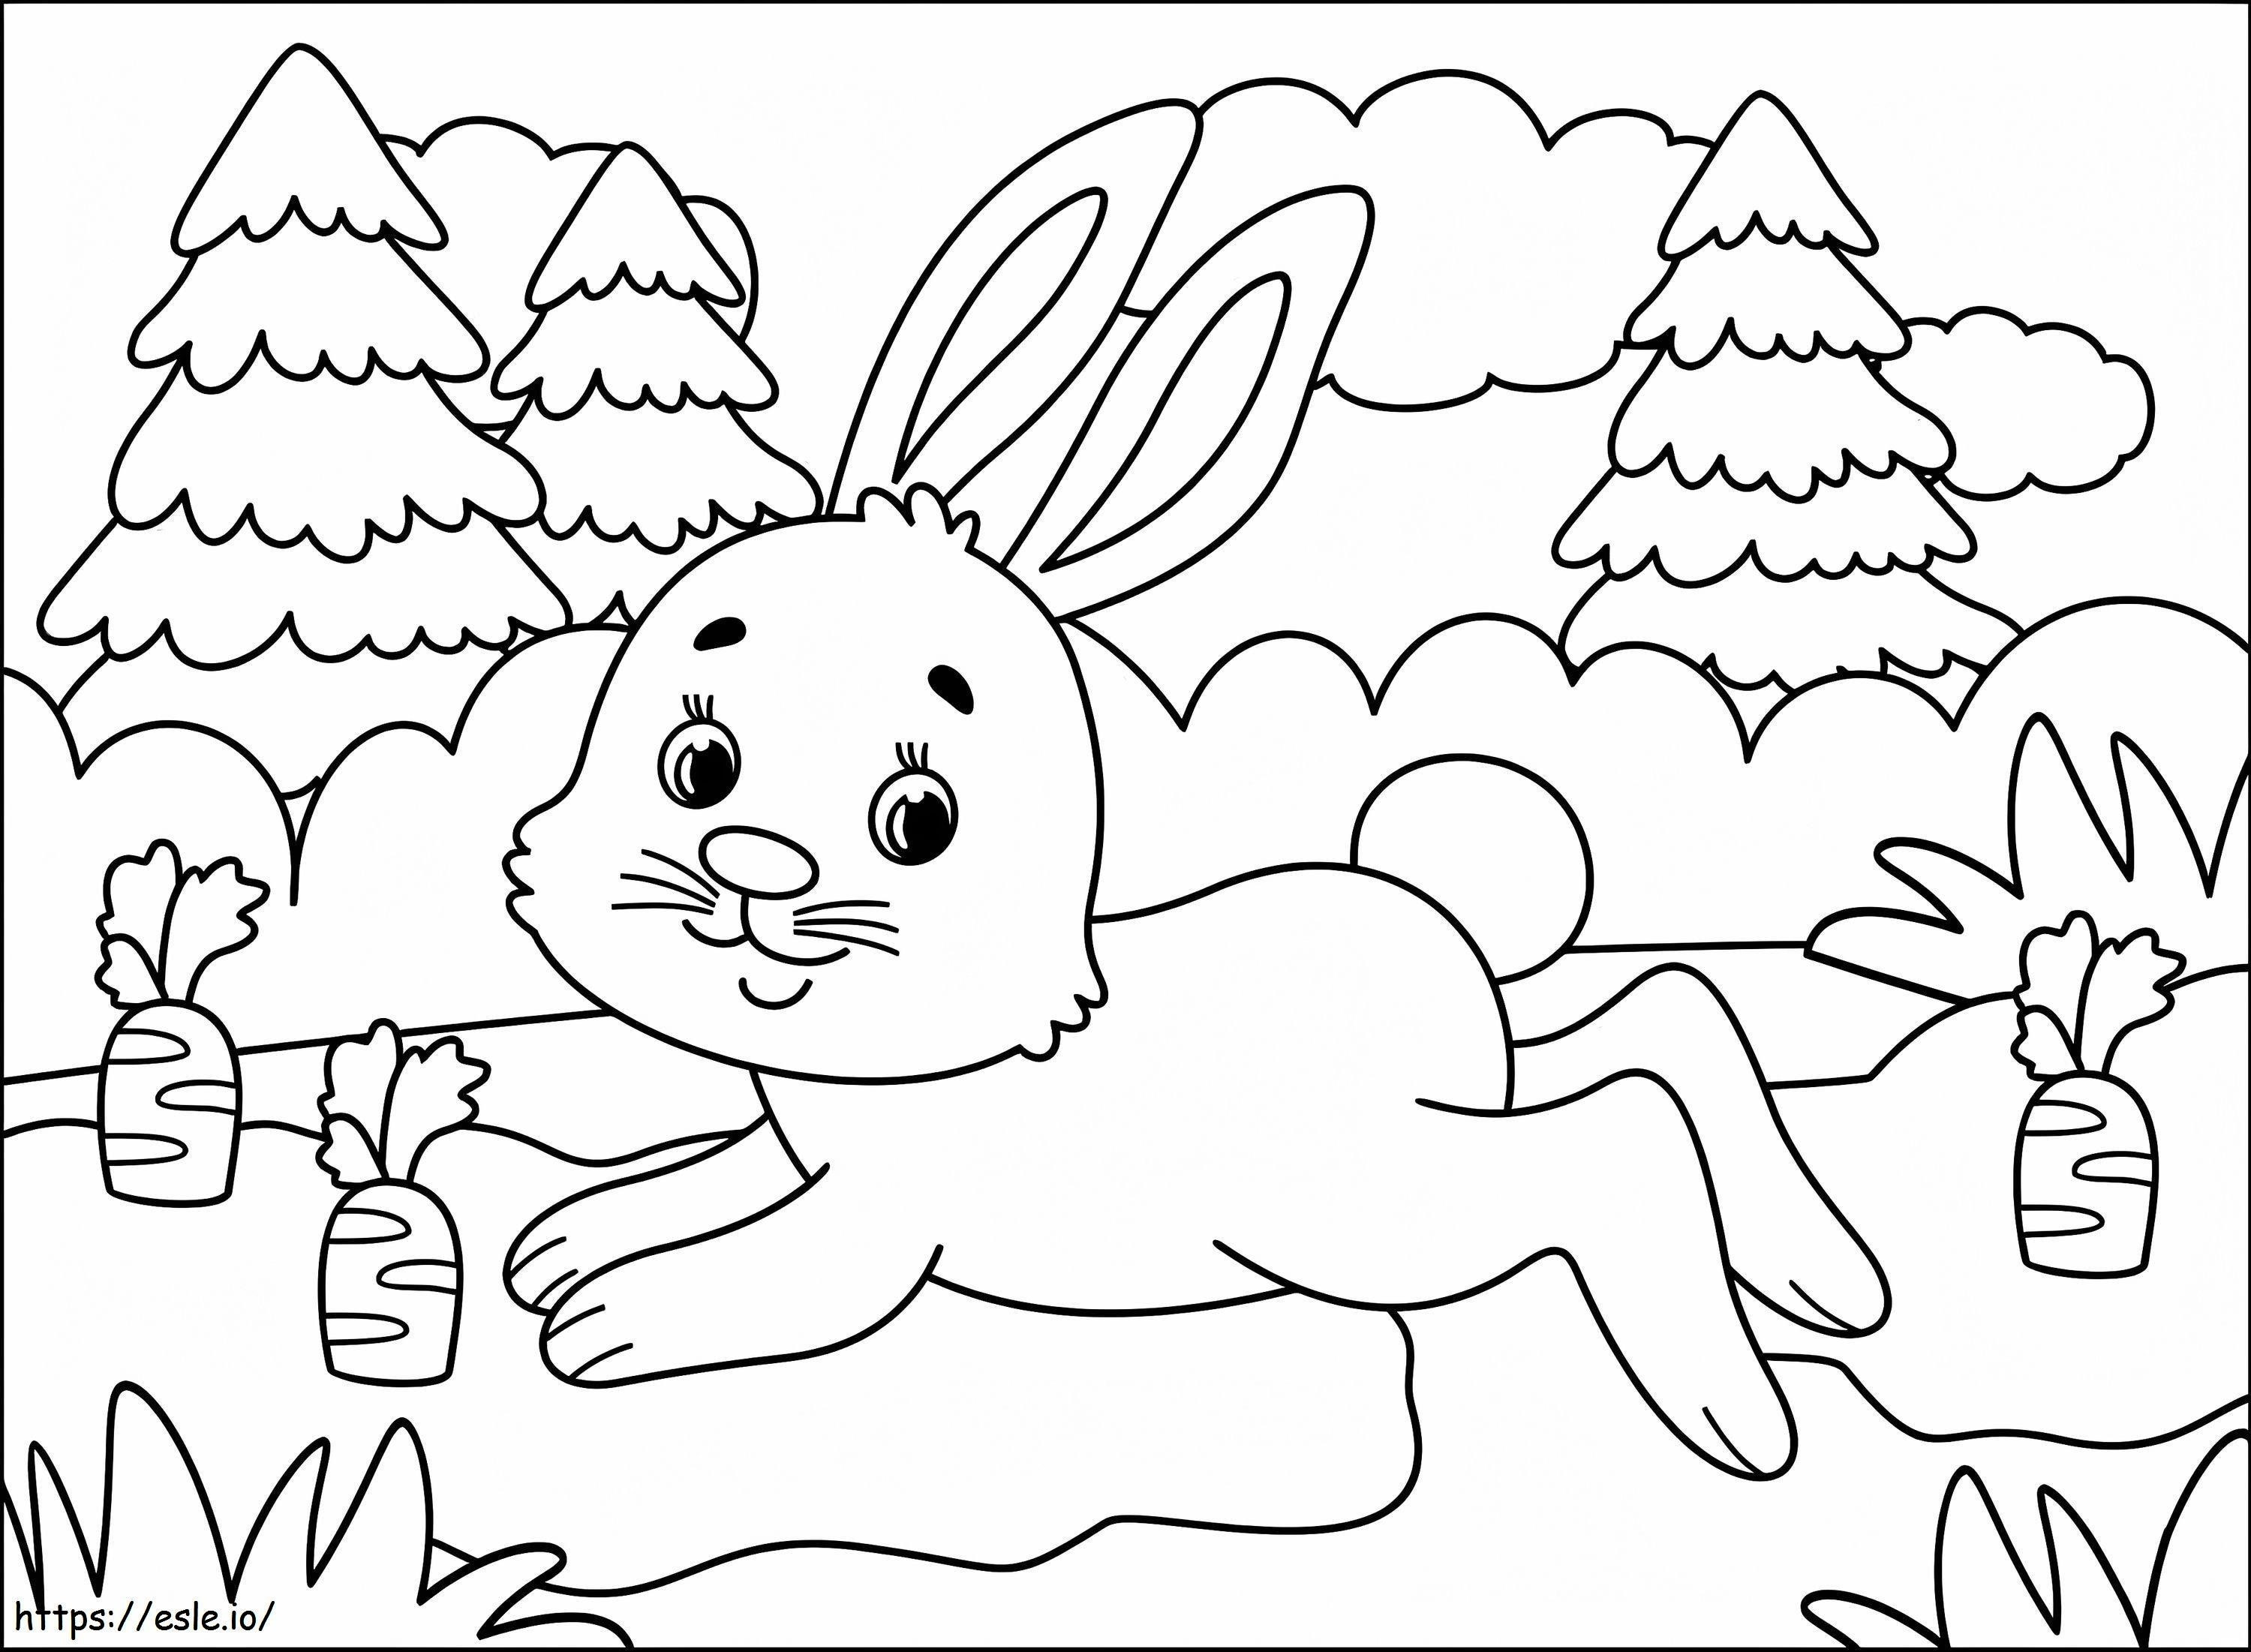 Rabbit In The Wood coloring page